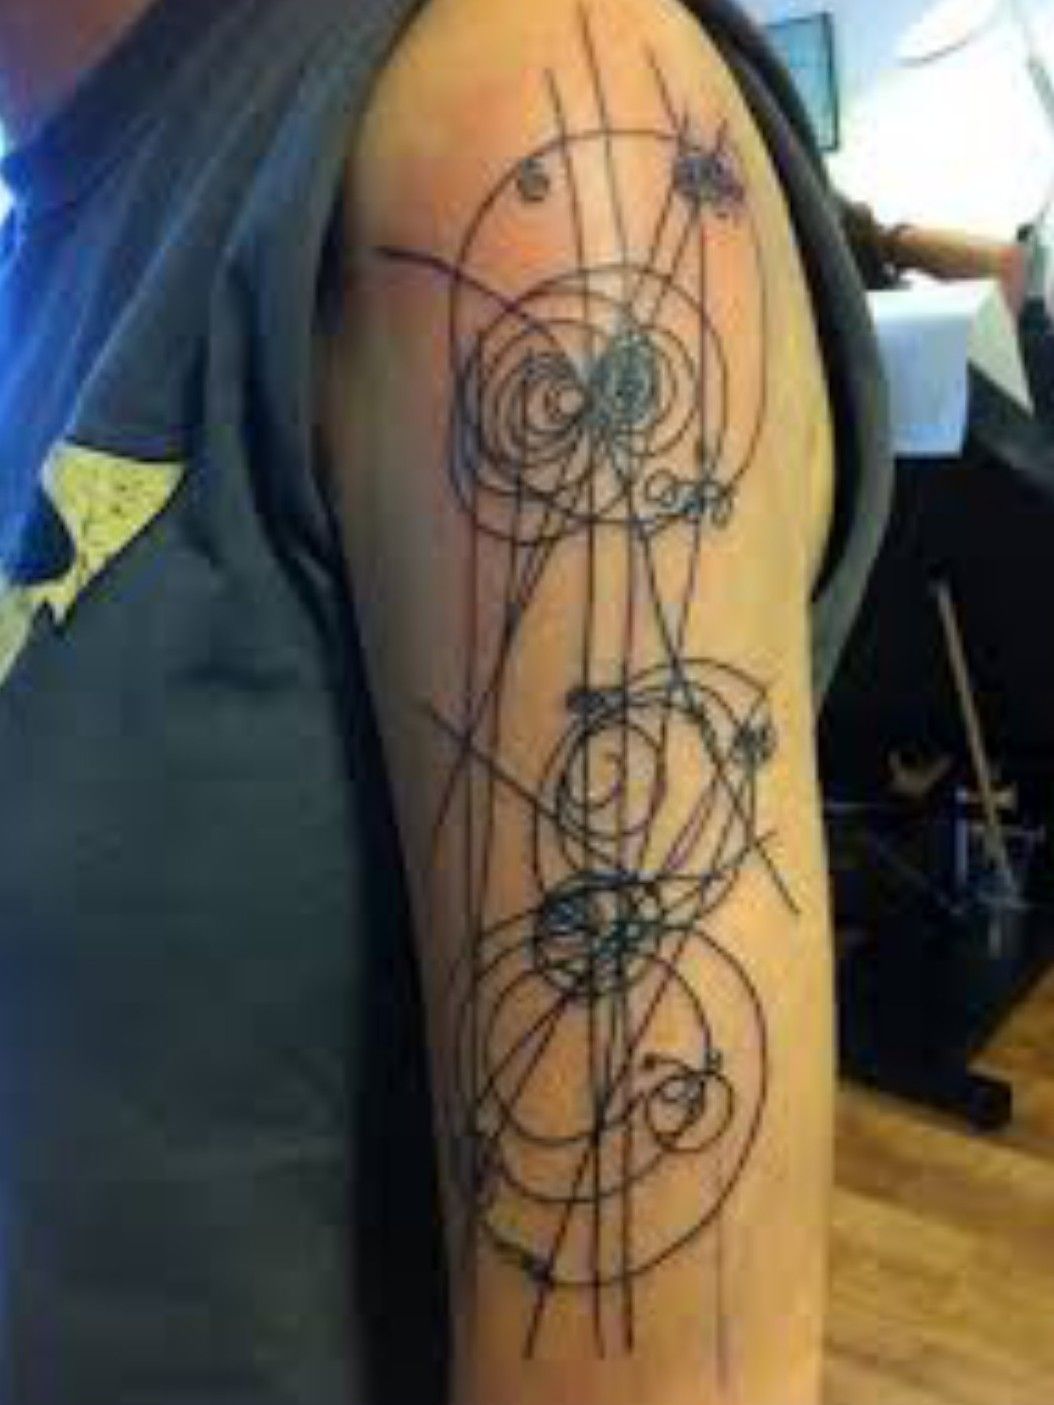 While were talking about the Omega heres one of my tattoos bonus  journal article in album  rPhysics